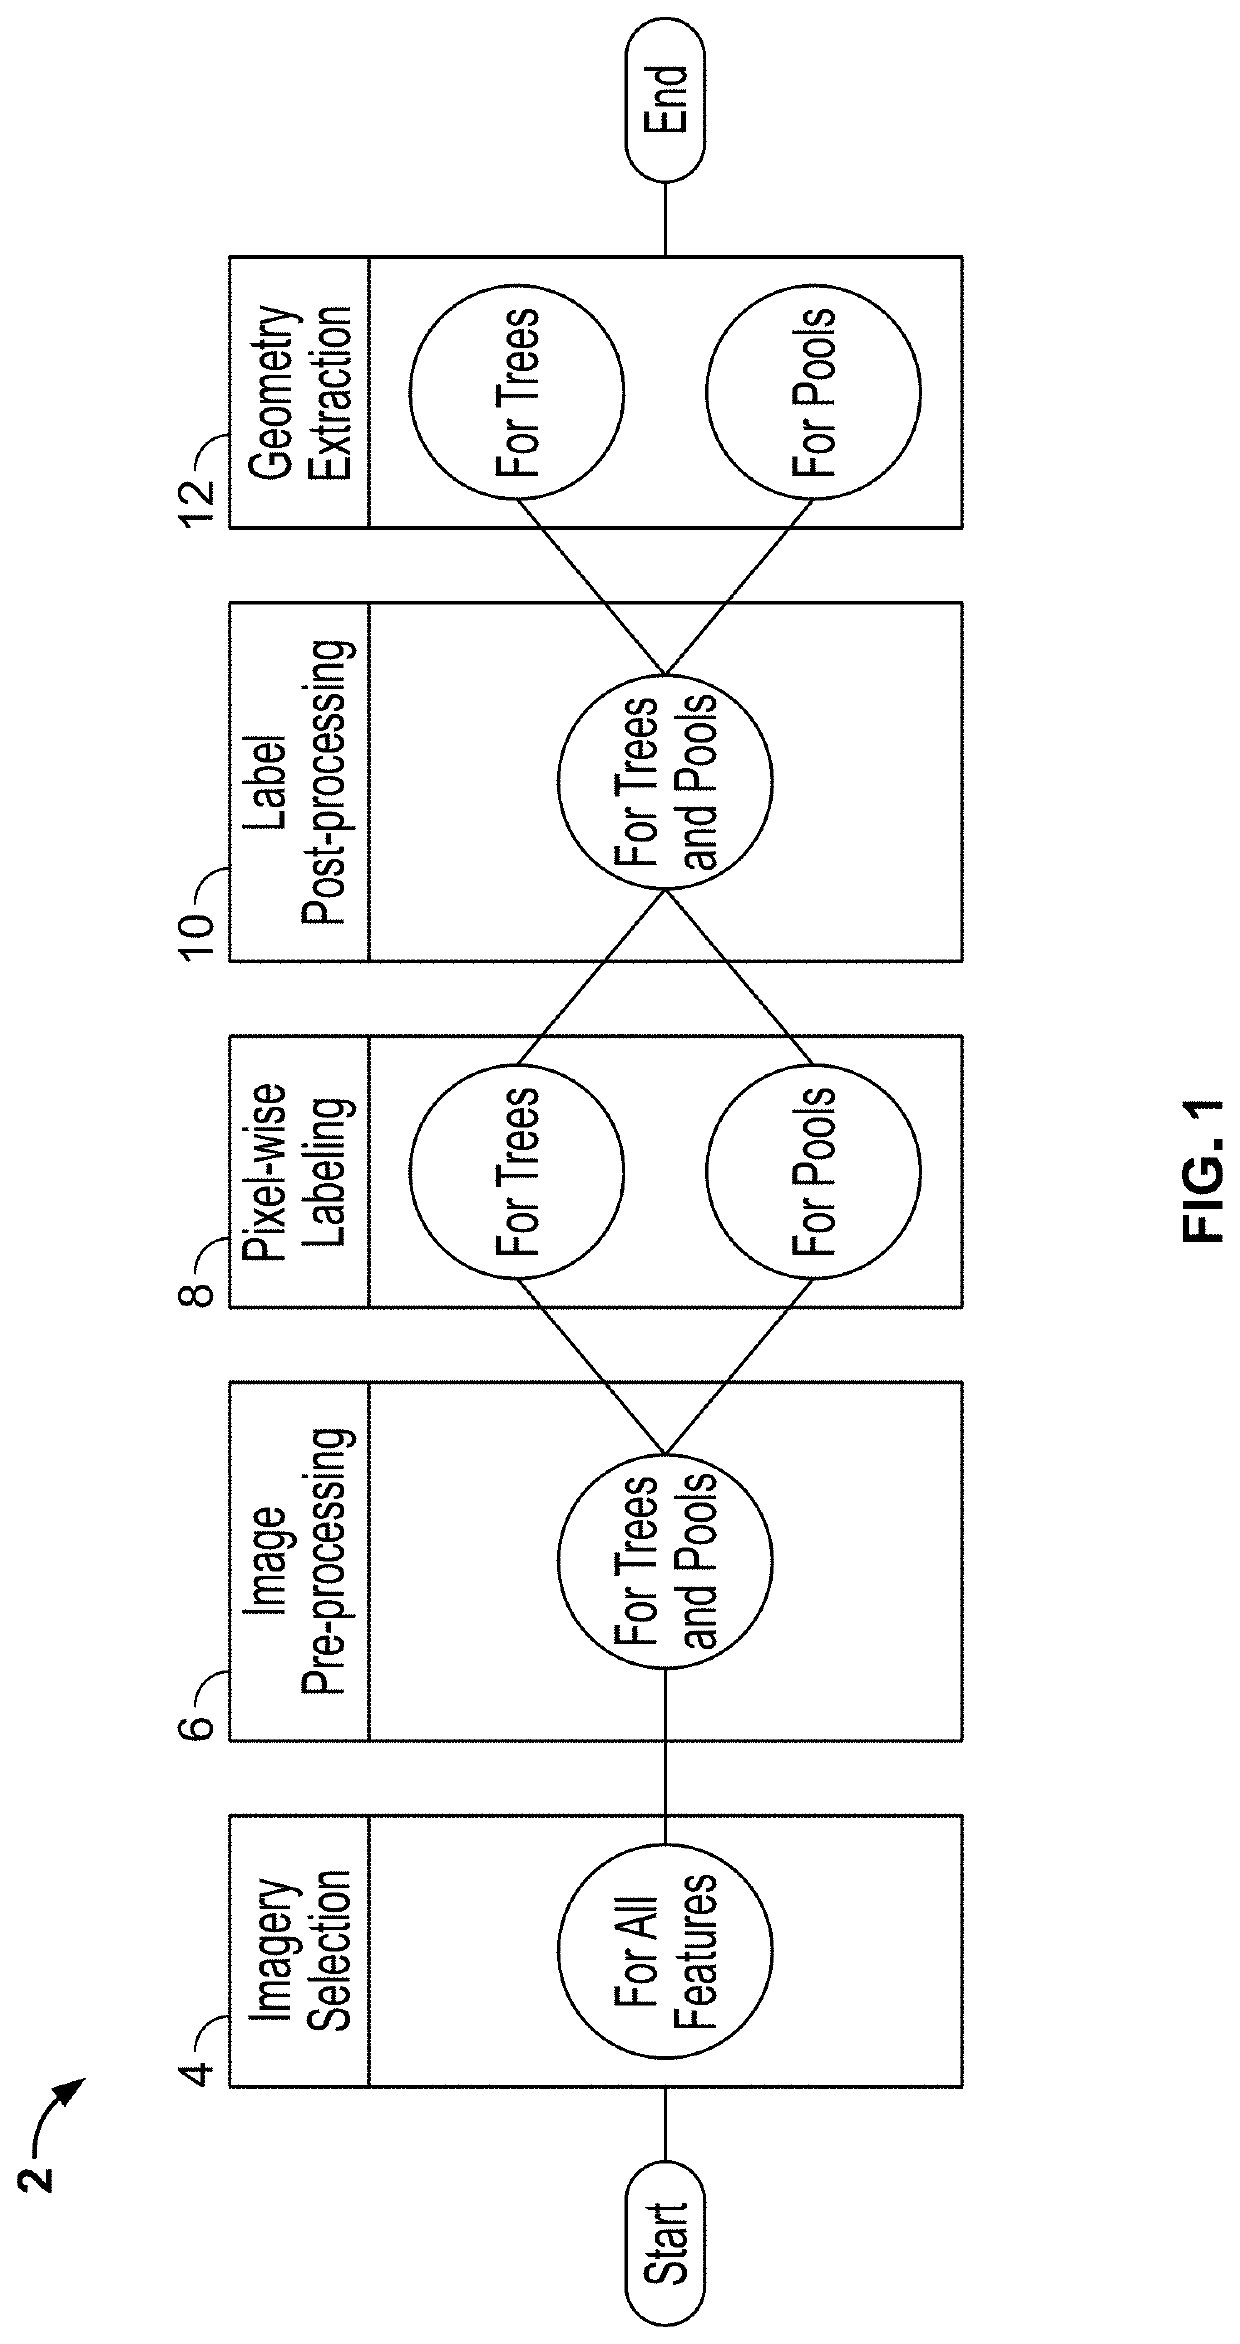 Computer vision systems and methods for geospatial property feature detection and extraction from digital images